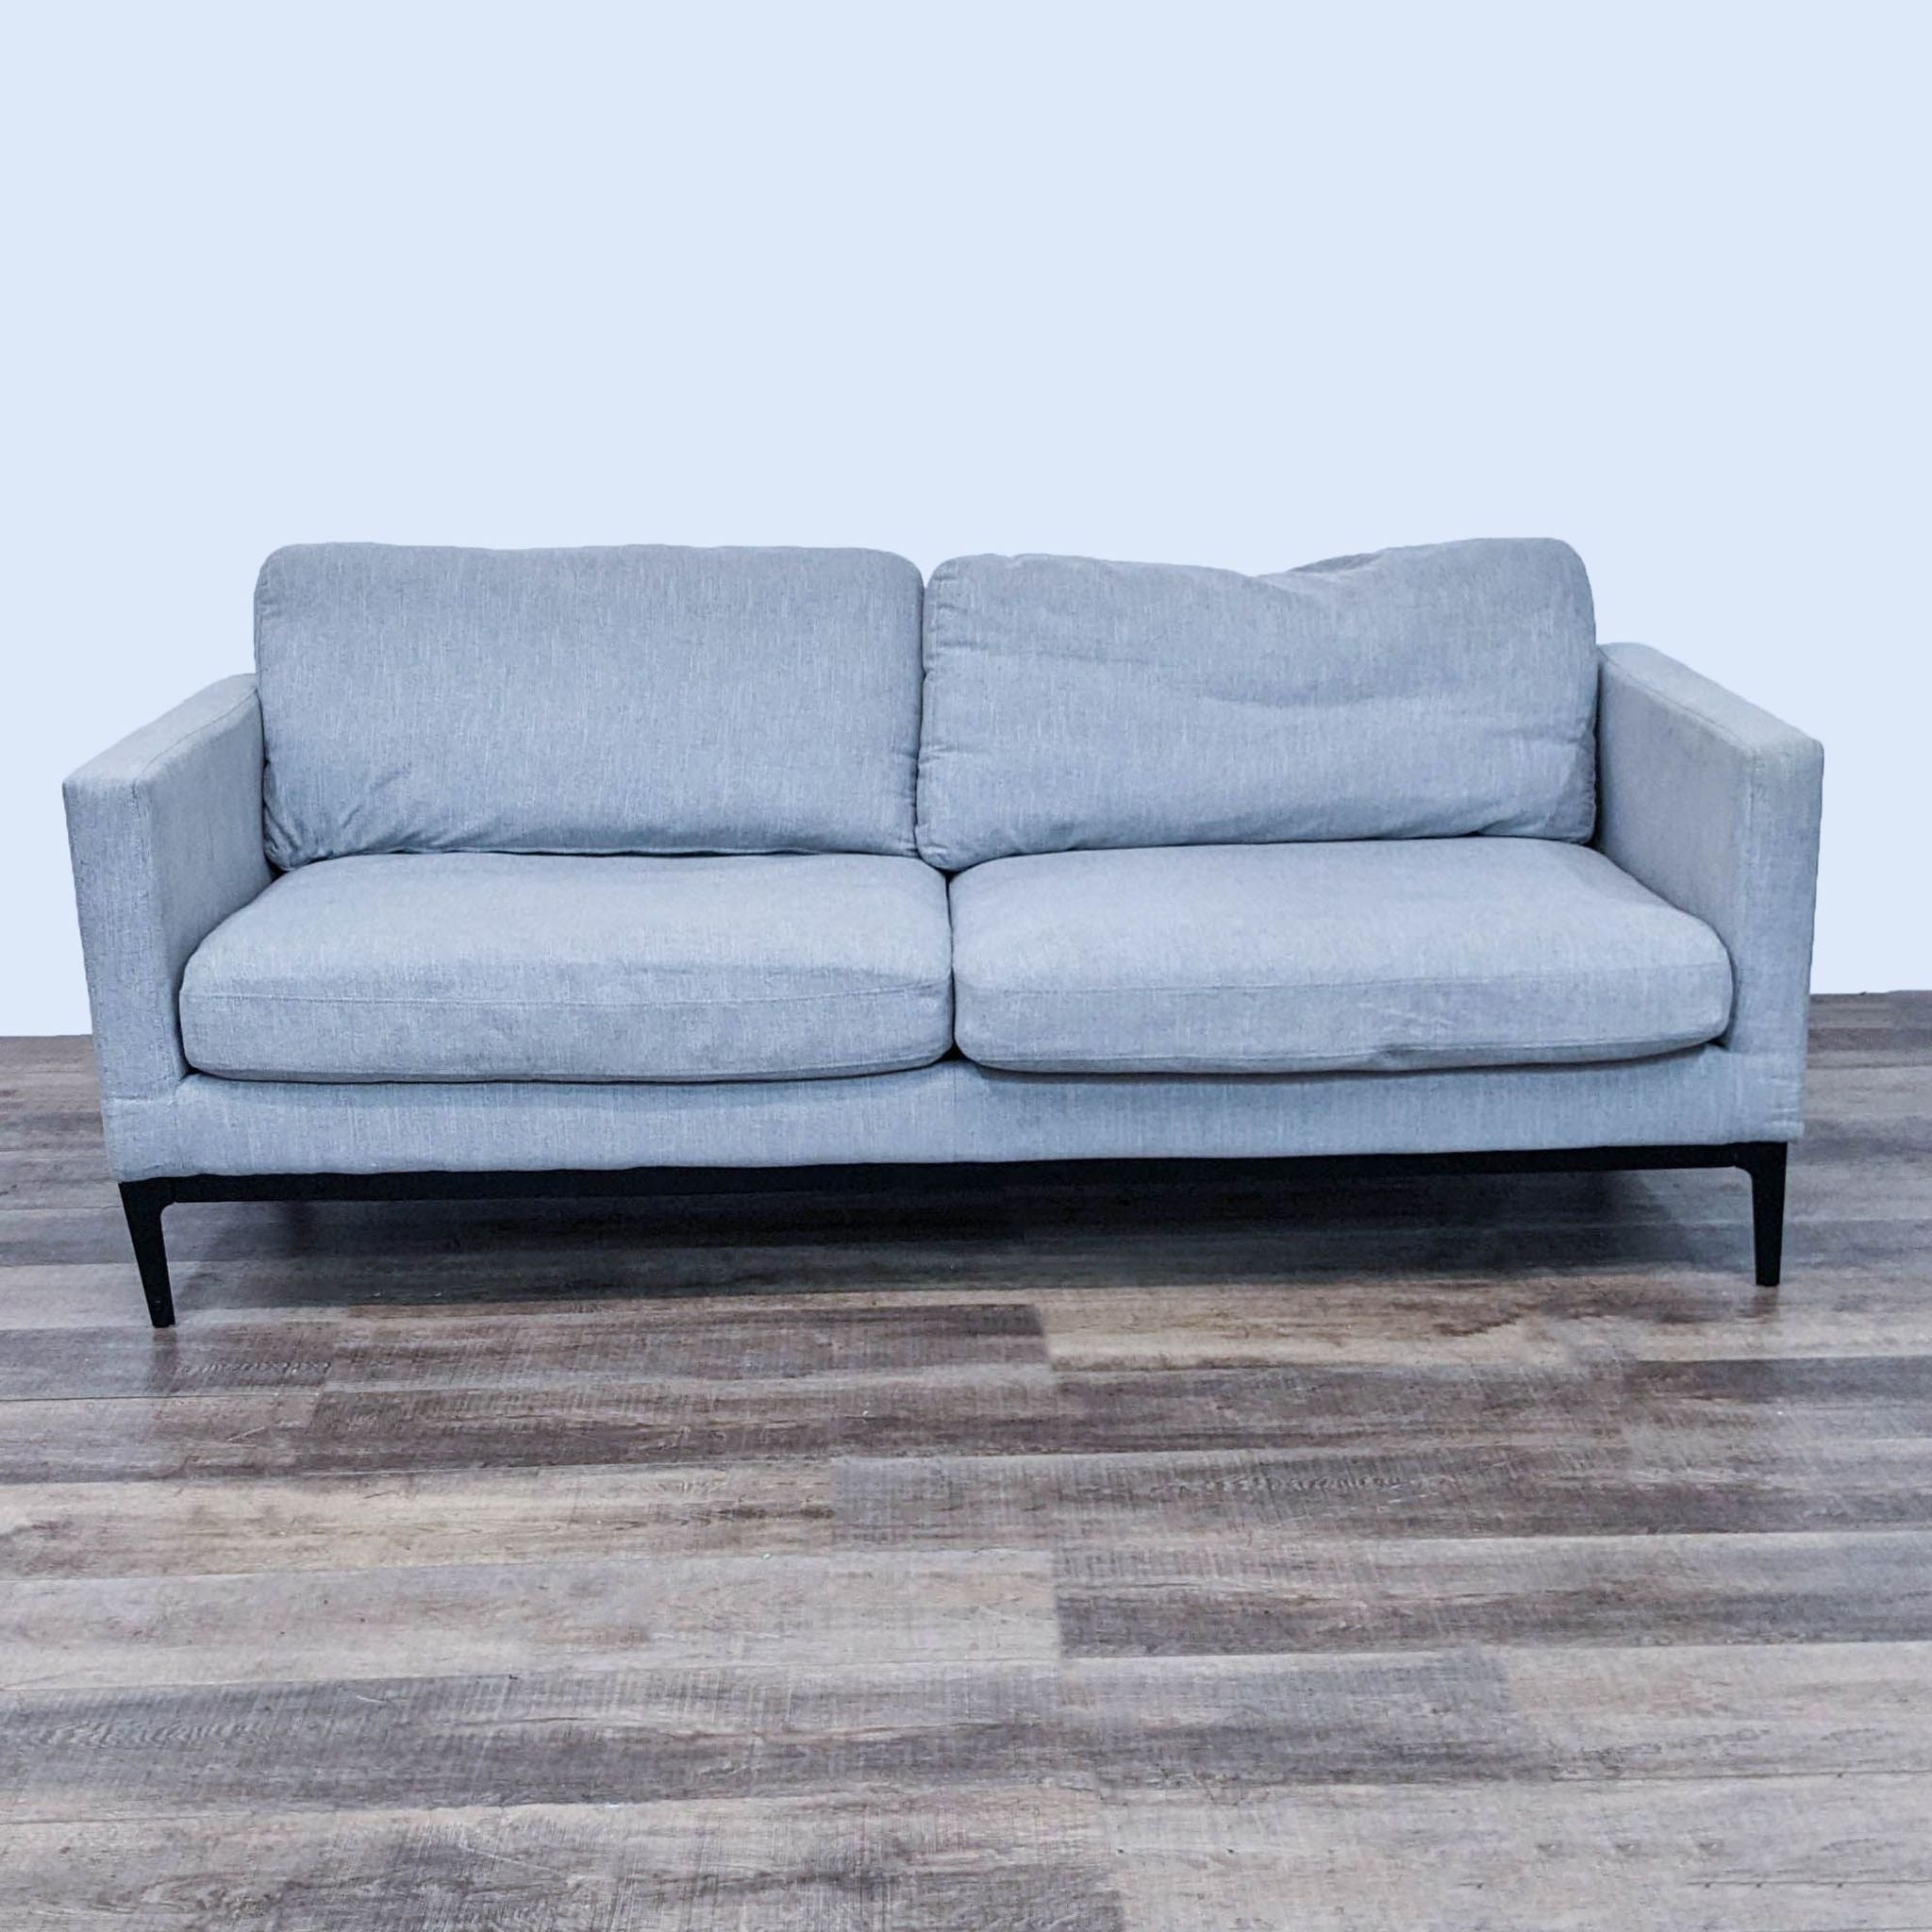 Alt text 1: Three-seat Coaster sofa with a clean line design, gray upholstery, narrow arms, and metal frame feet against a wooden floor.